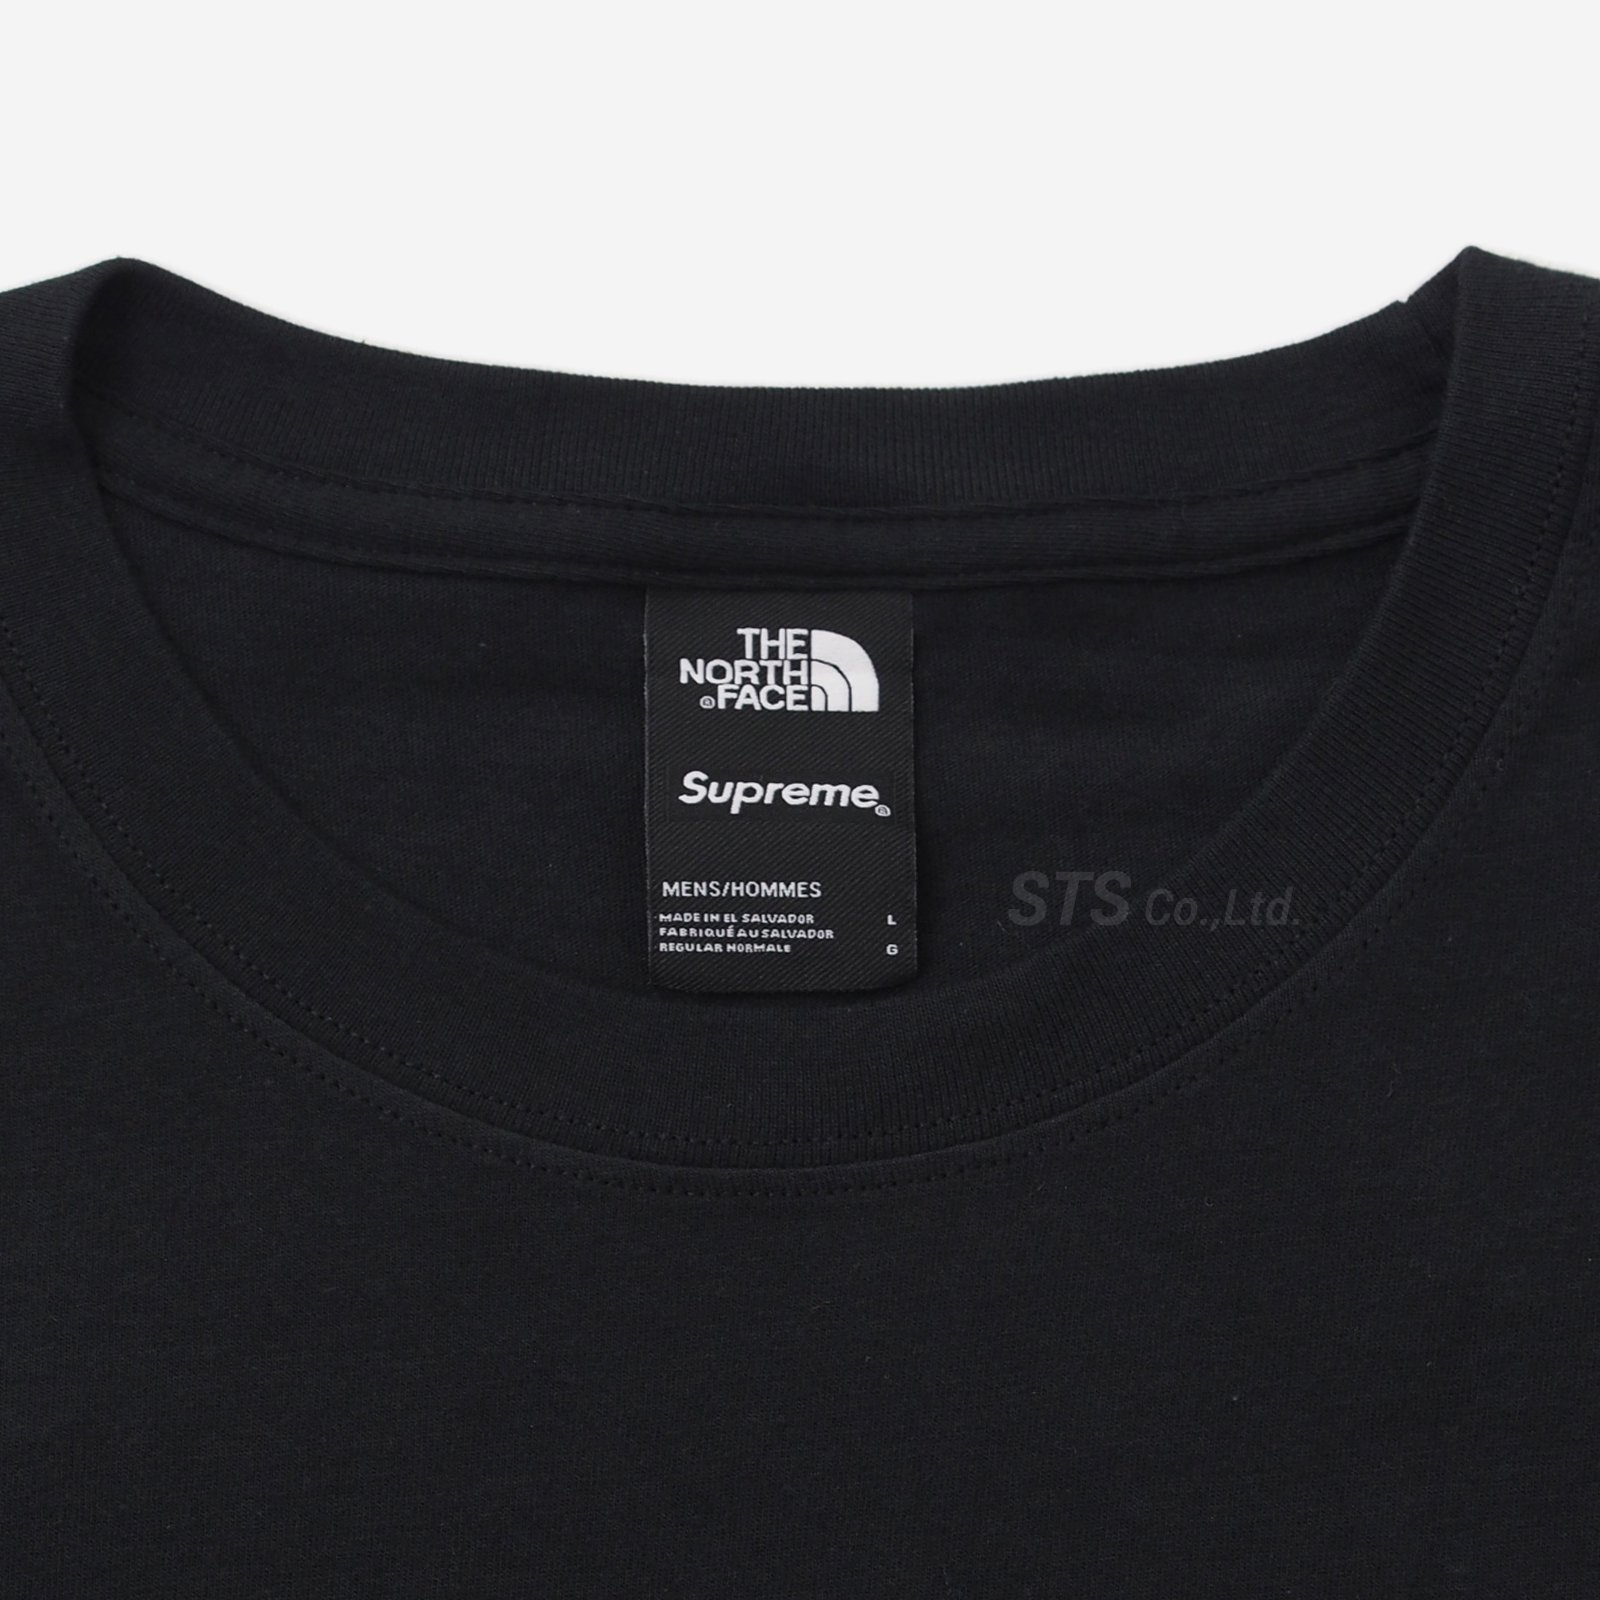 Supreme/The North Face Statue of Liberty Tee - ParkSIDER